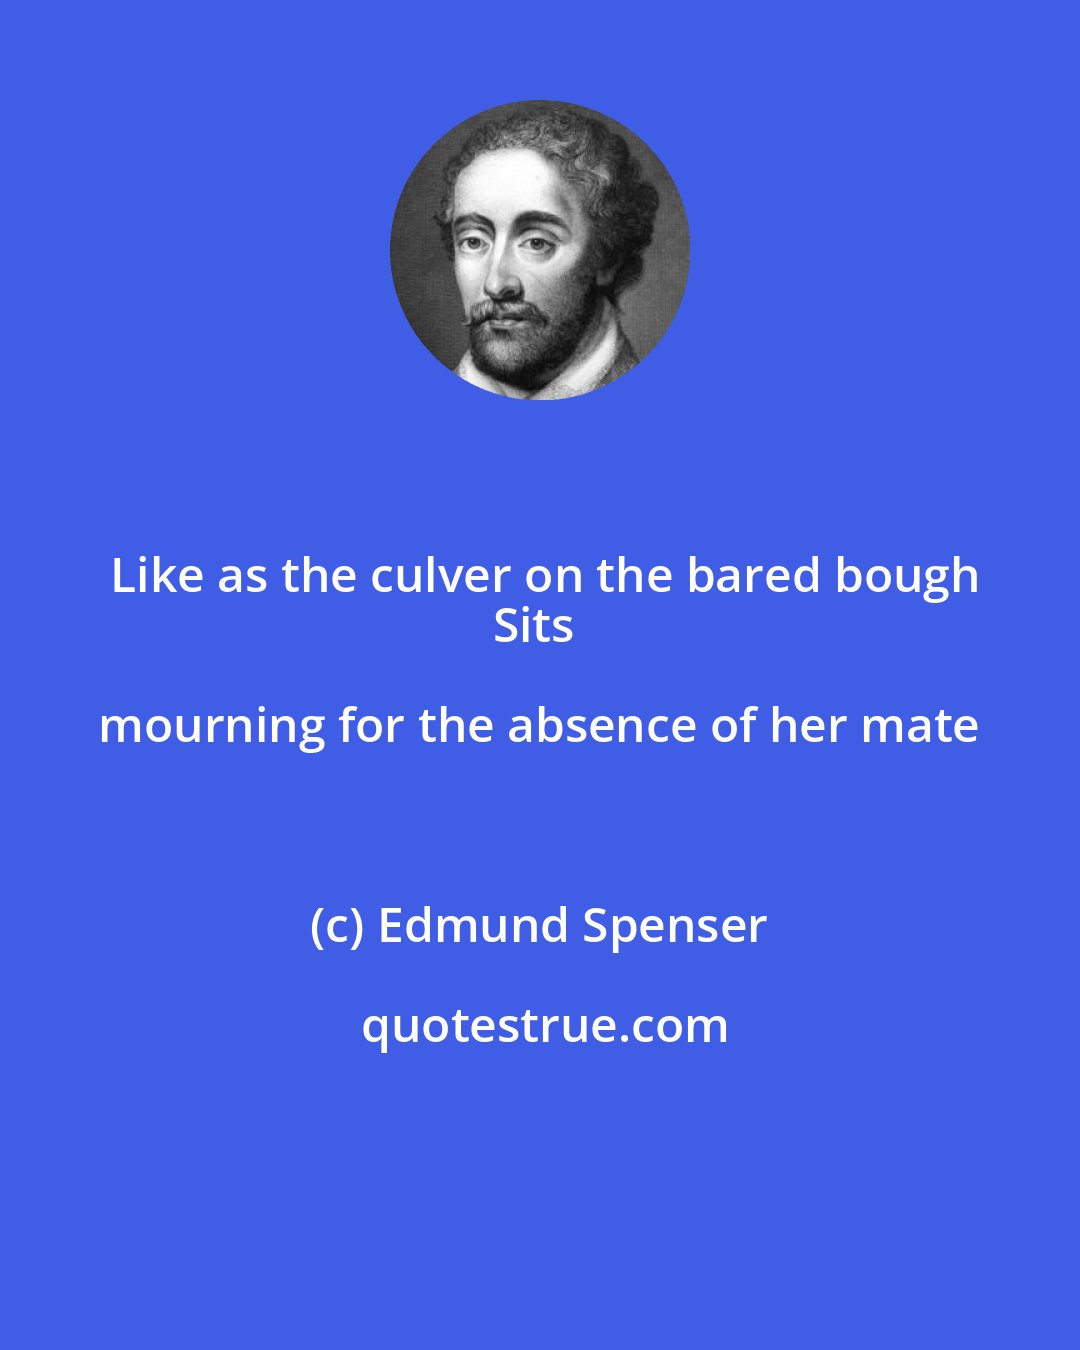 Edmund Spenser: Like as the culver on the bared bough
Sits mourning for the absence of her mate